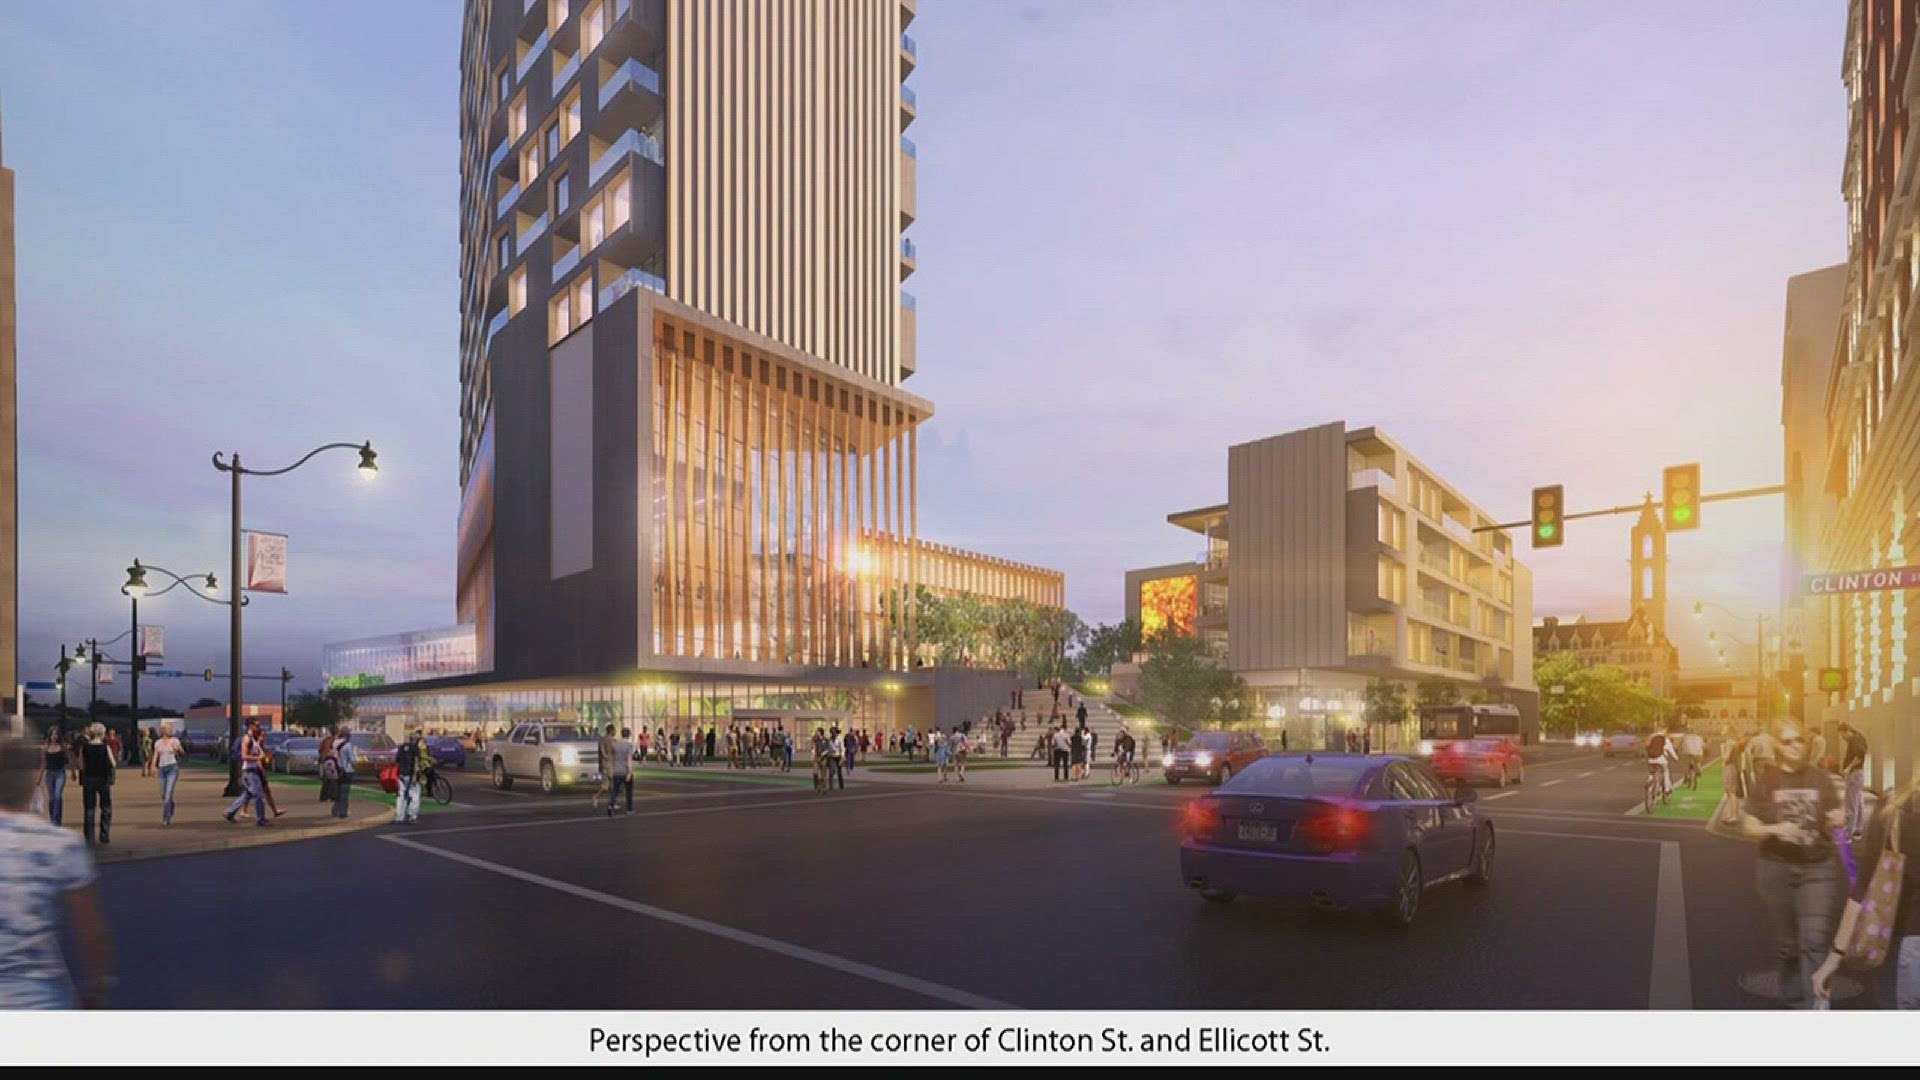 Channel 2's Heather Ly talked with Buffalo Mayor Byron Brown to get an update on the proposed development on Ellicott Street near the Central Library.